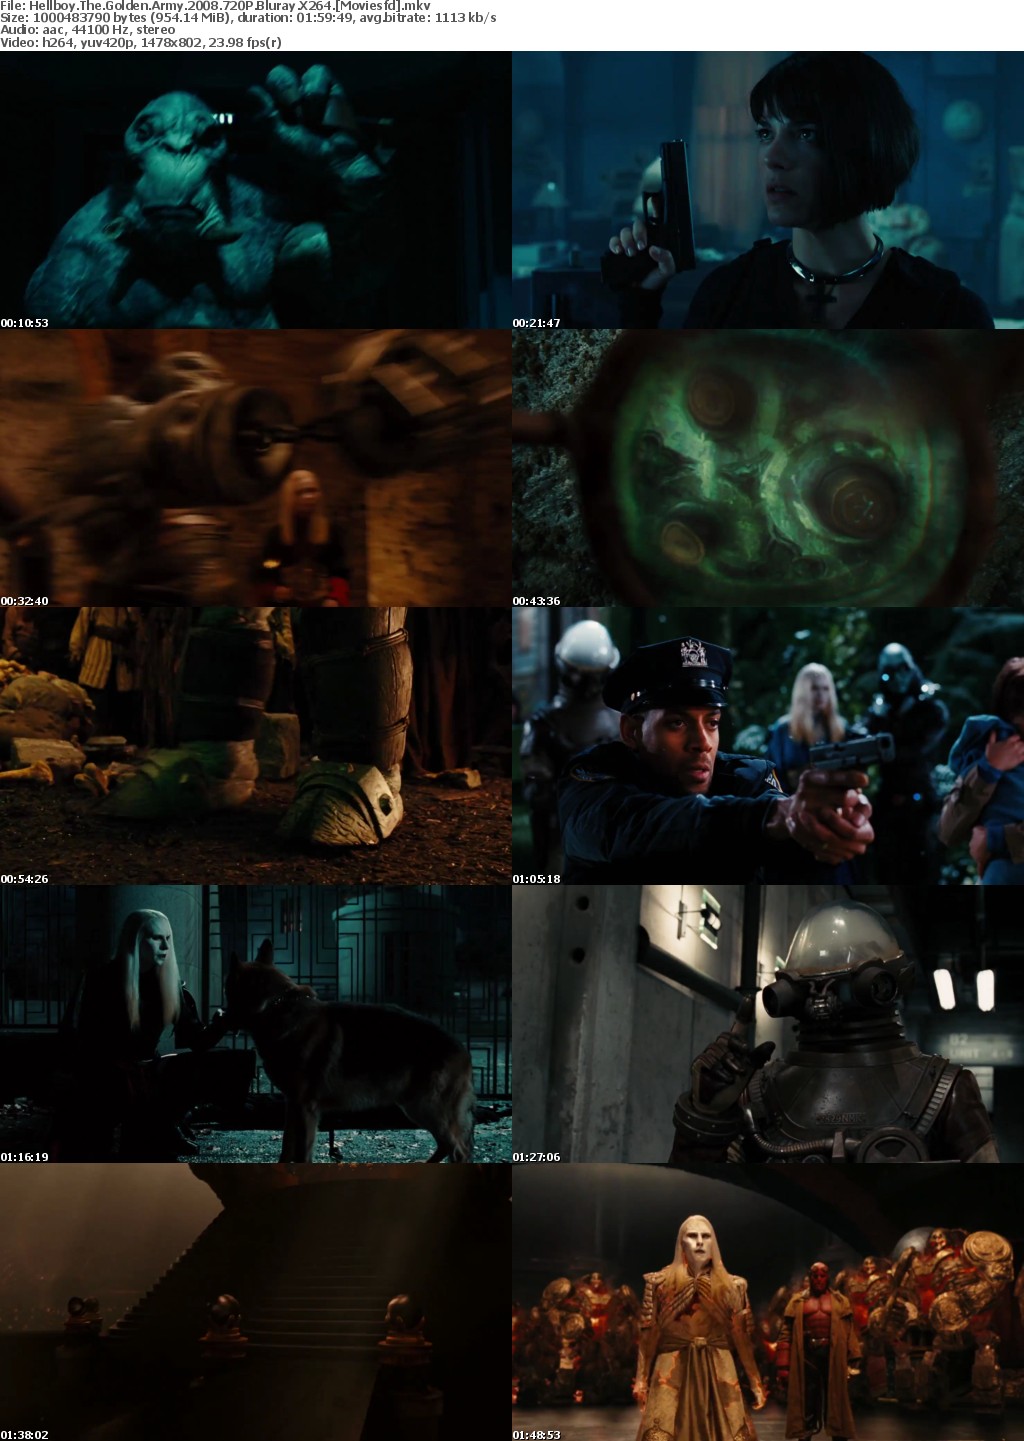 Hellboy The Golden Army (2008) 720p BluRay x264 - MoviesFD